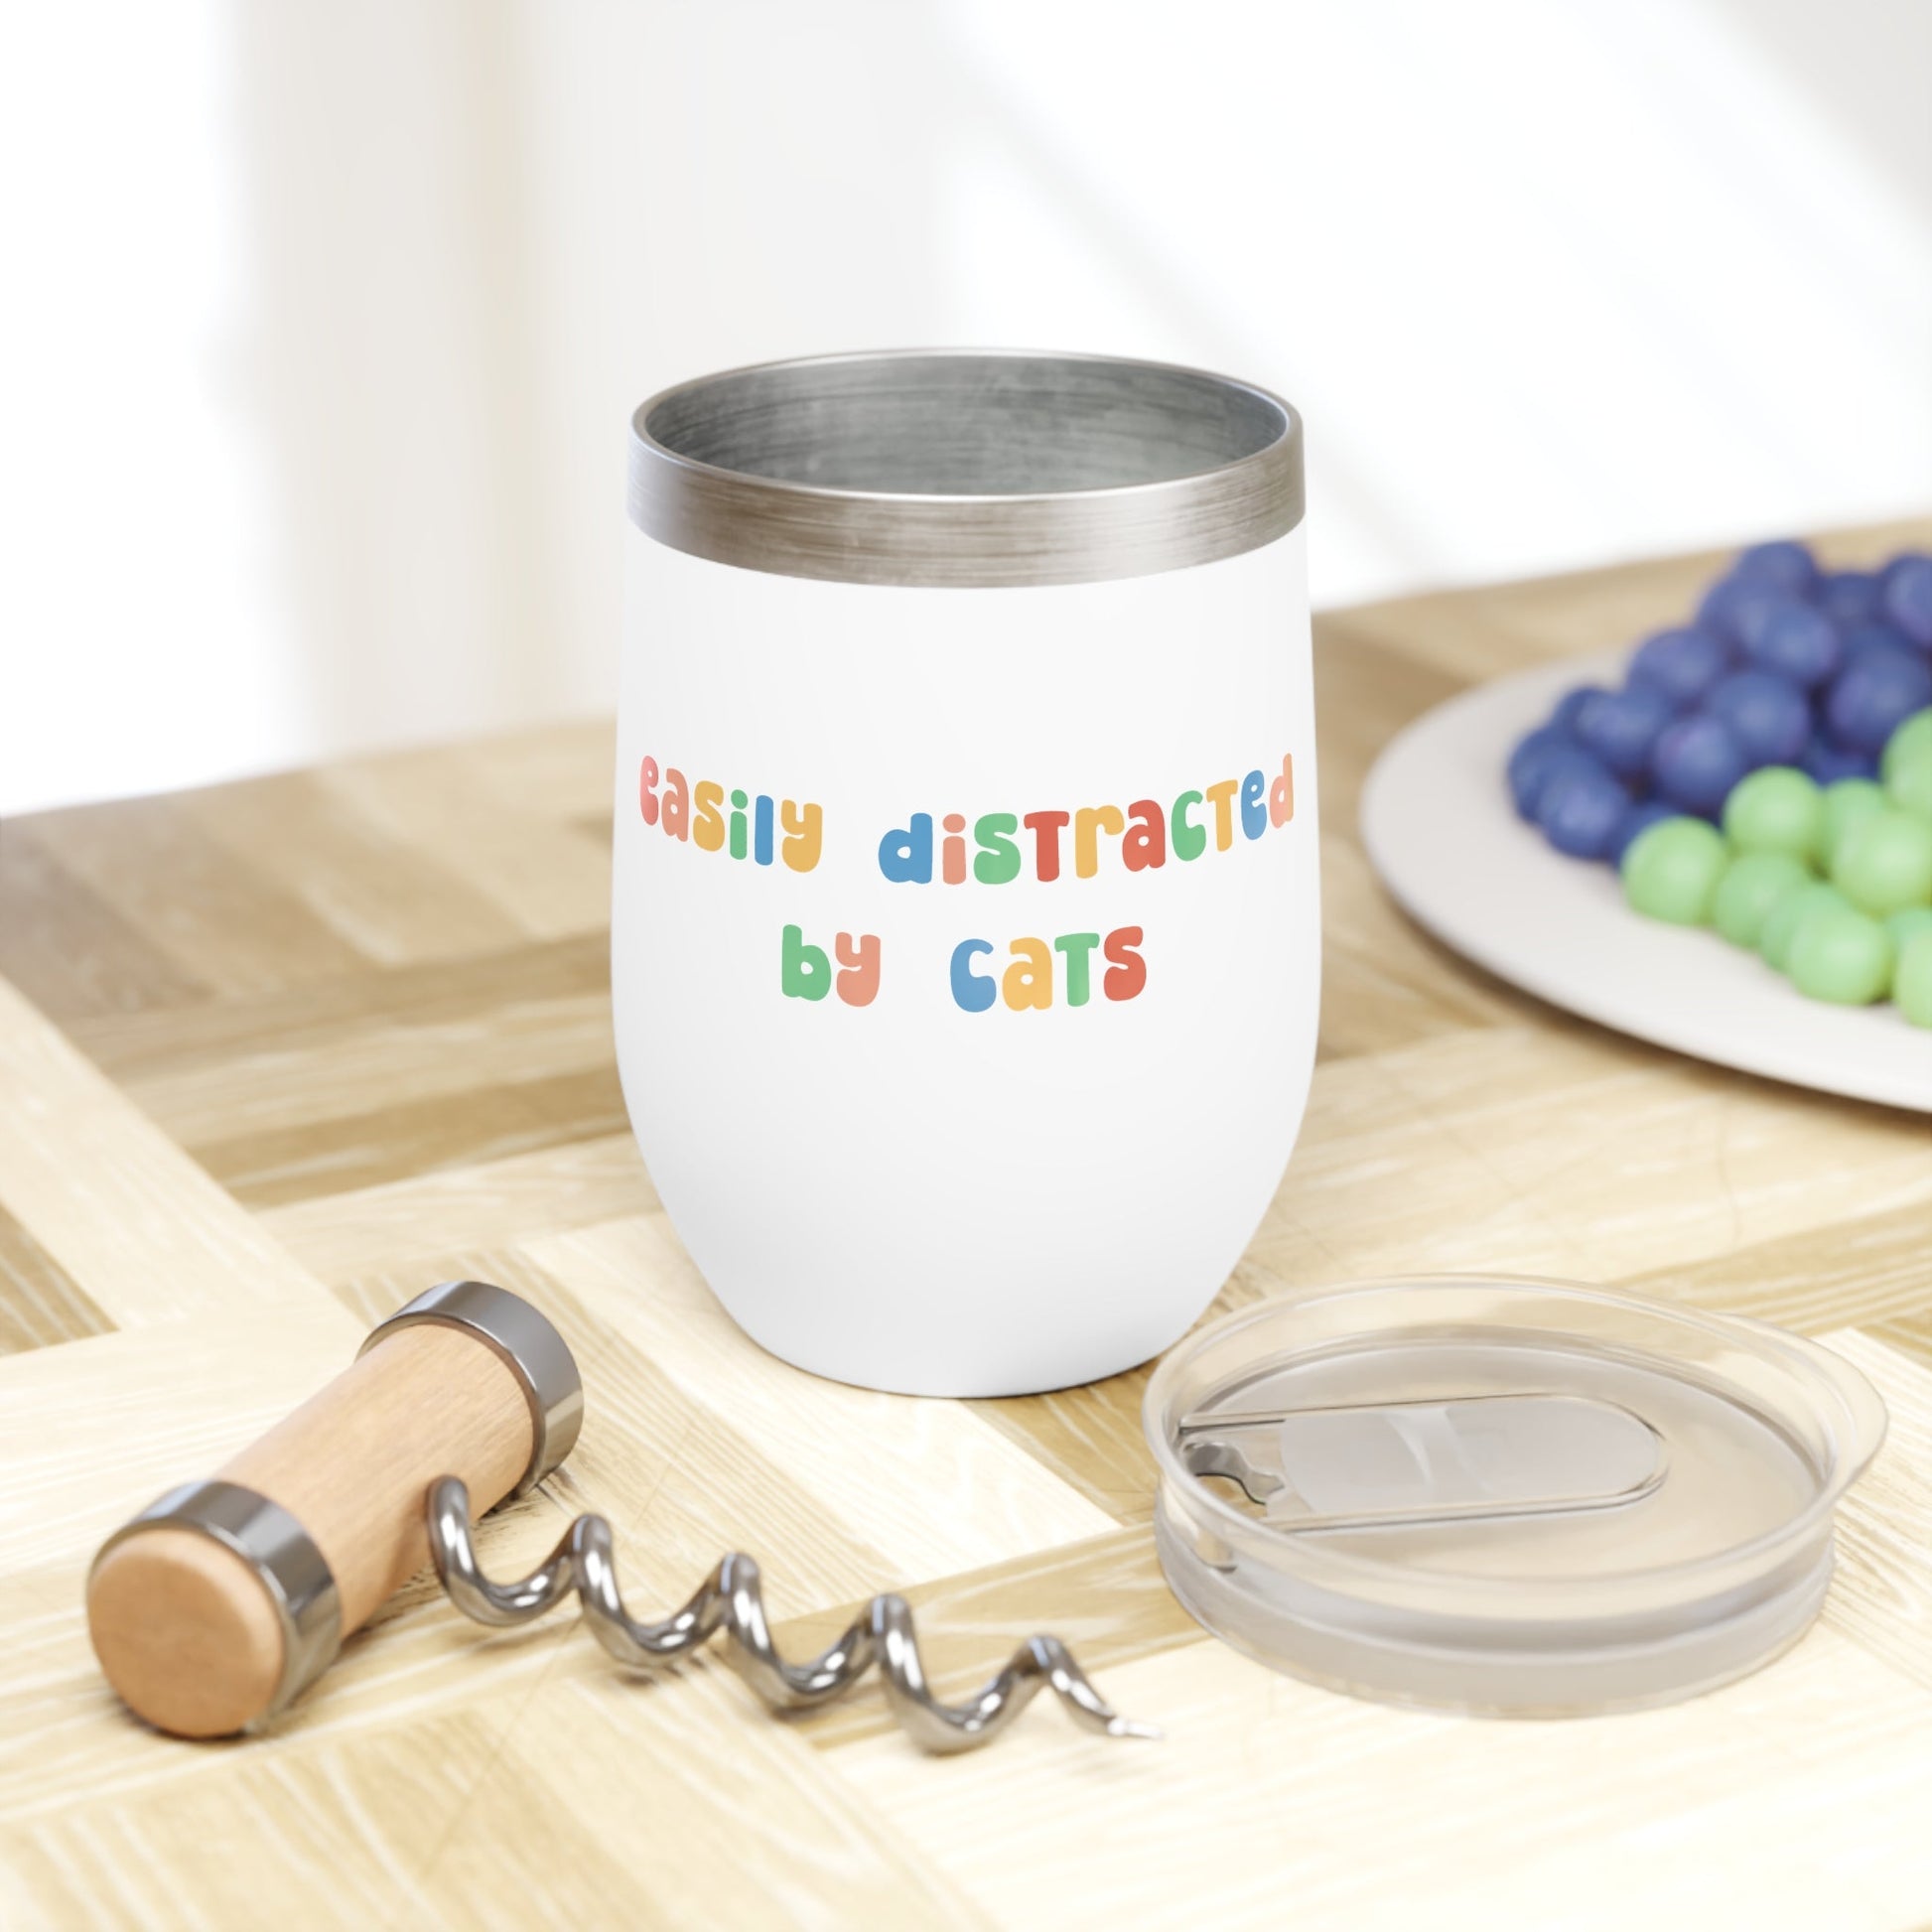 Easily Distracted by Cats | Wine Tumbler - Detezi Designs-32245351899233048415